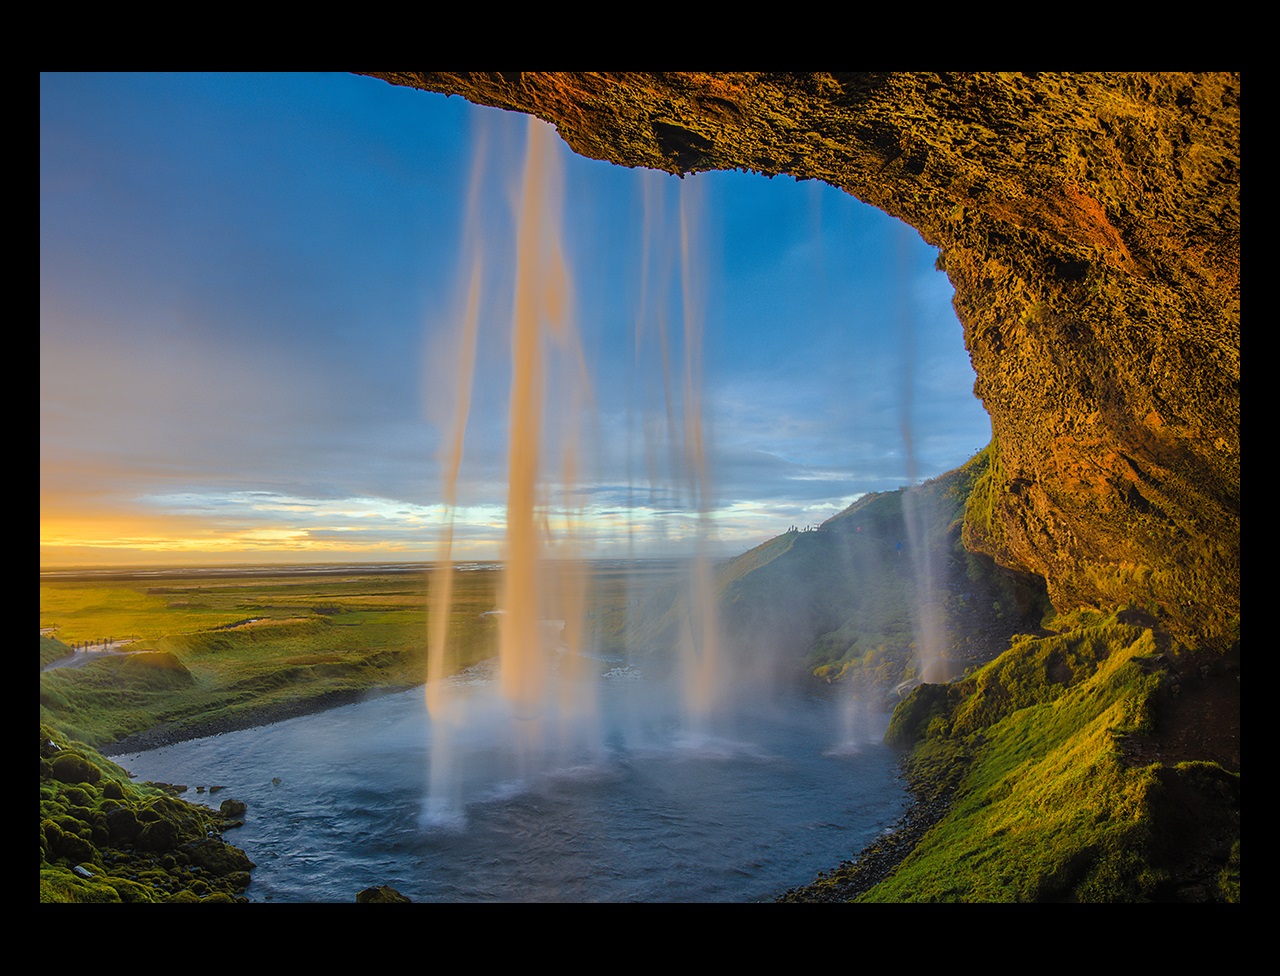 View of waterfall from inside a cave with sunlight